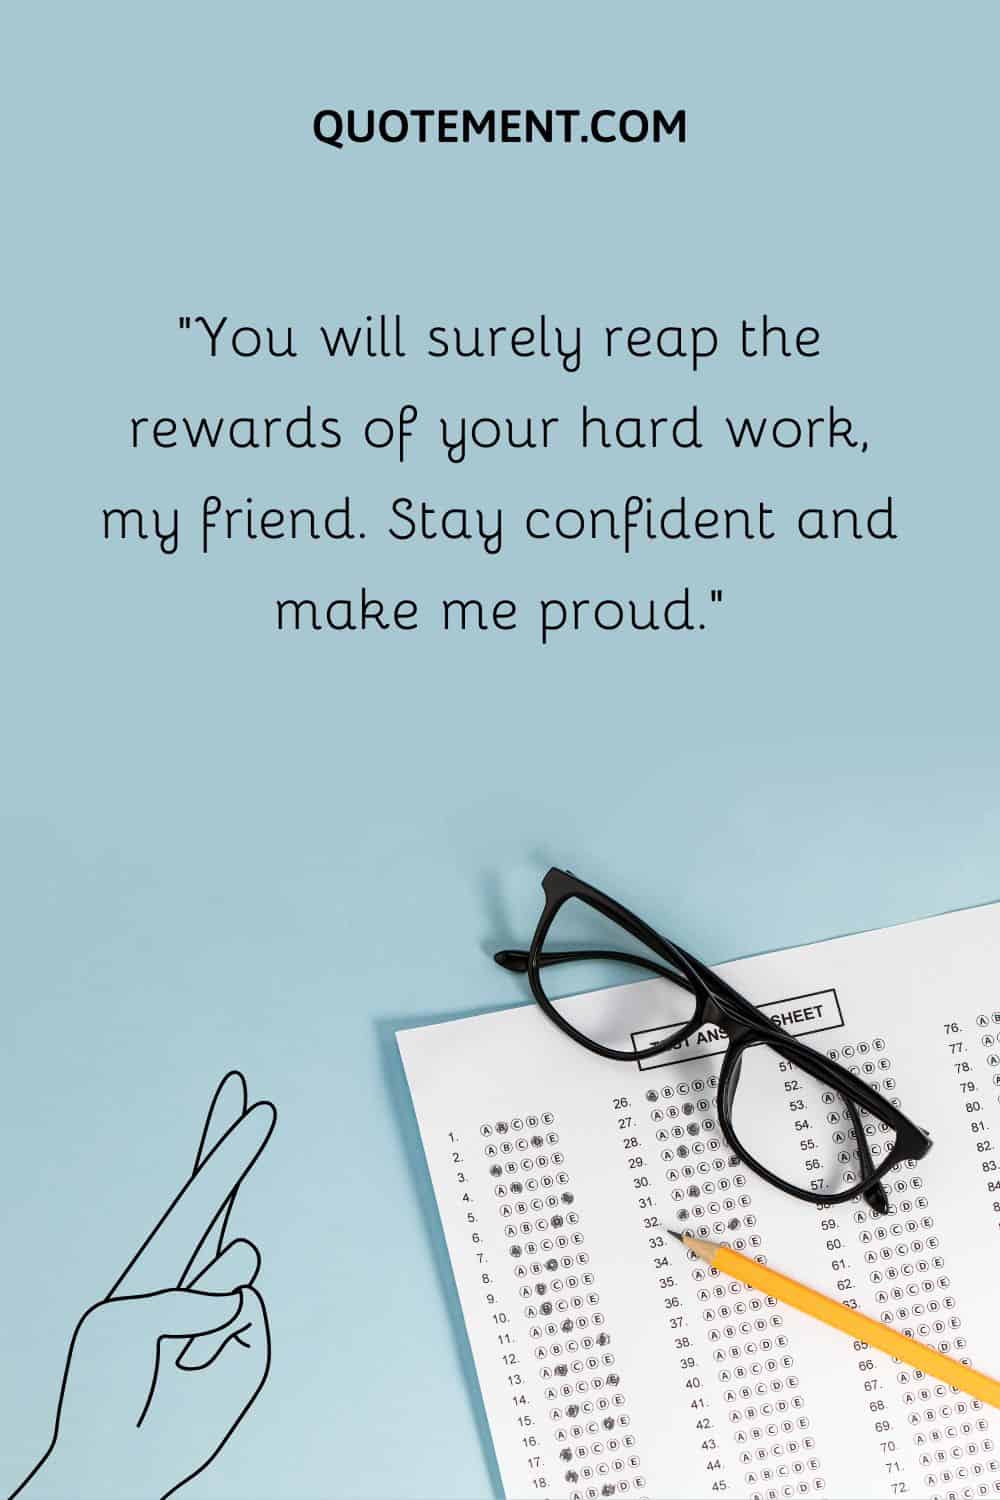 You will surely reap the rewards of your hard work,